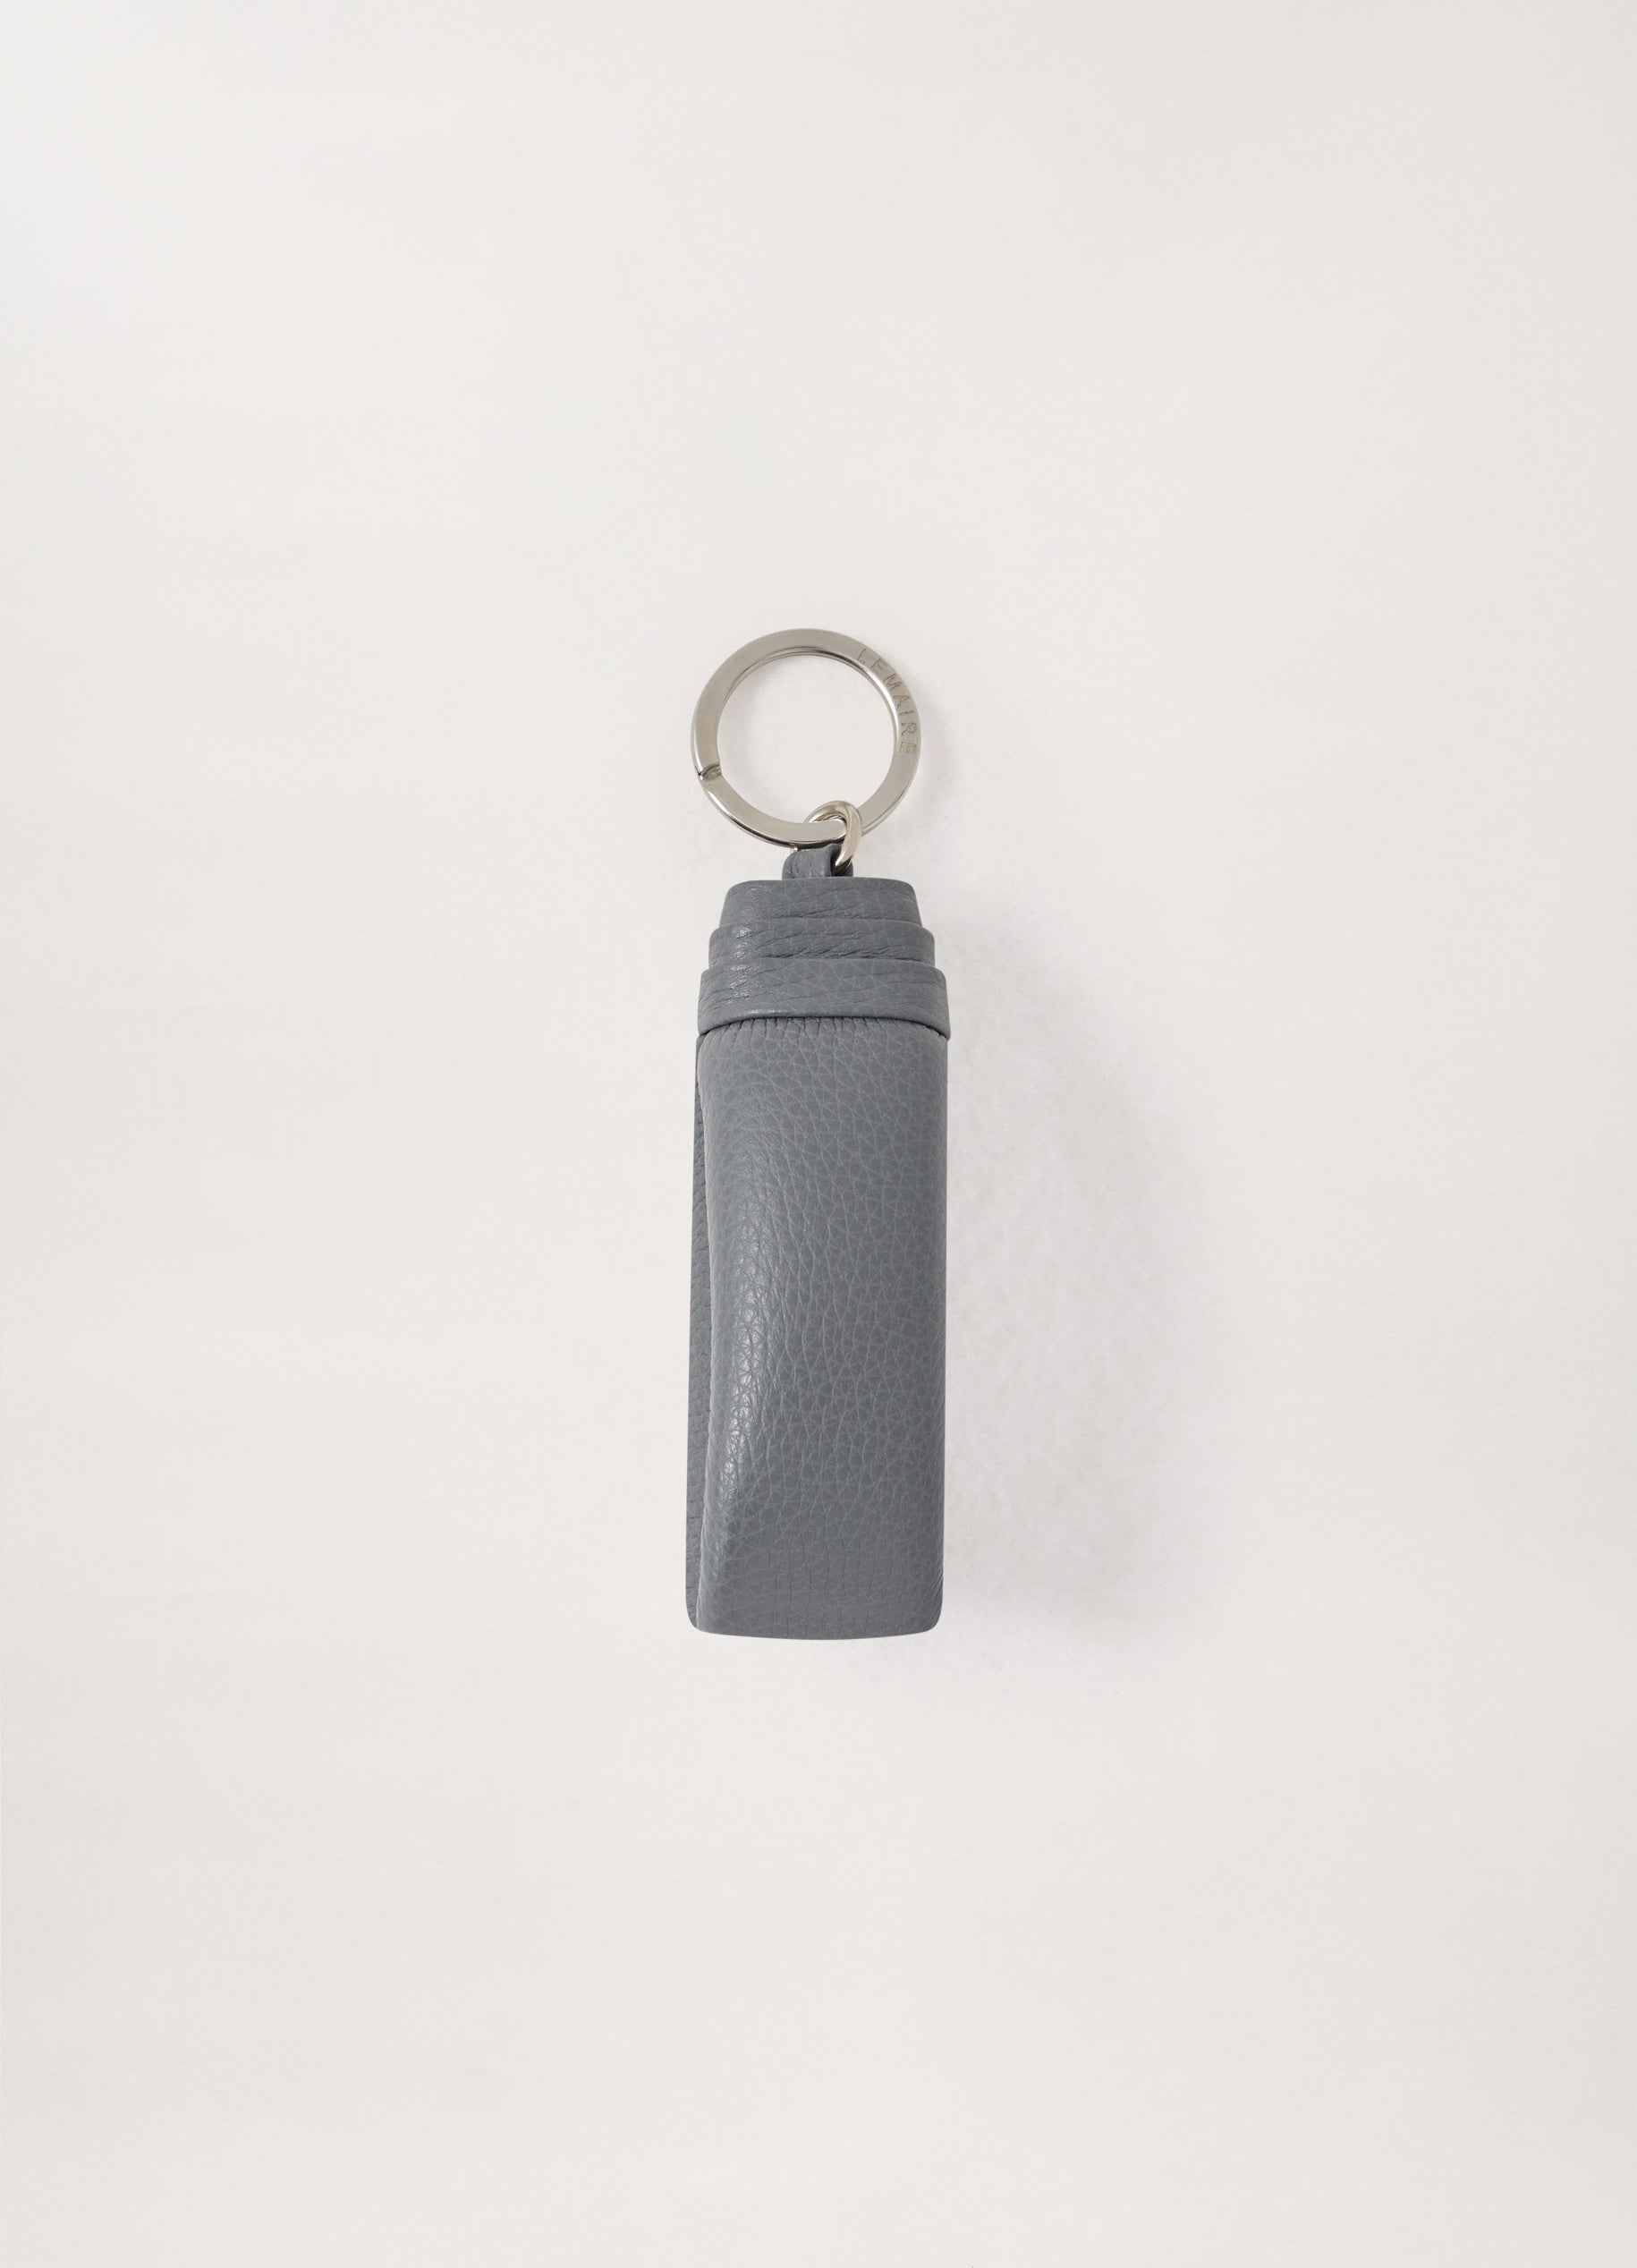 WADDED KEY HOLDER
SOFT GRAINED LEATHER - 1